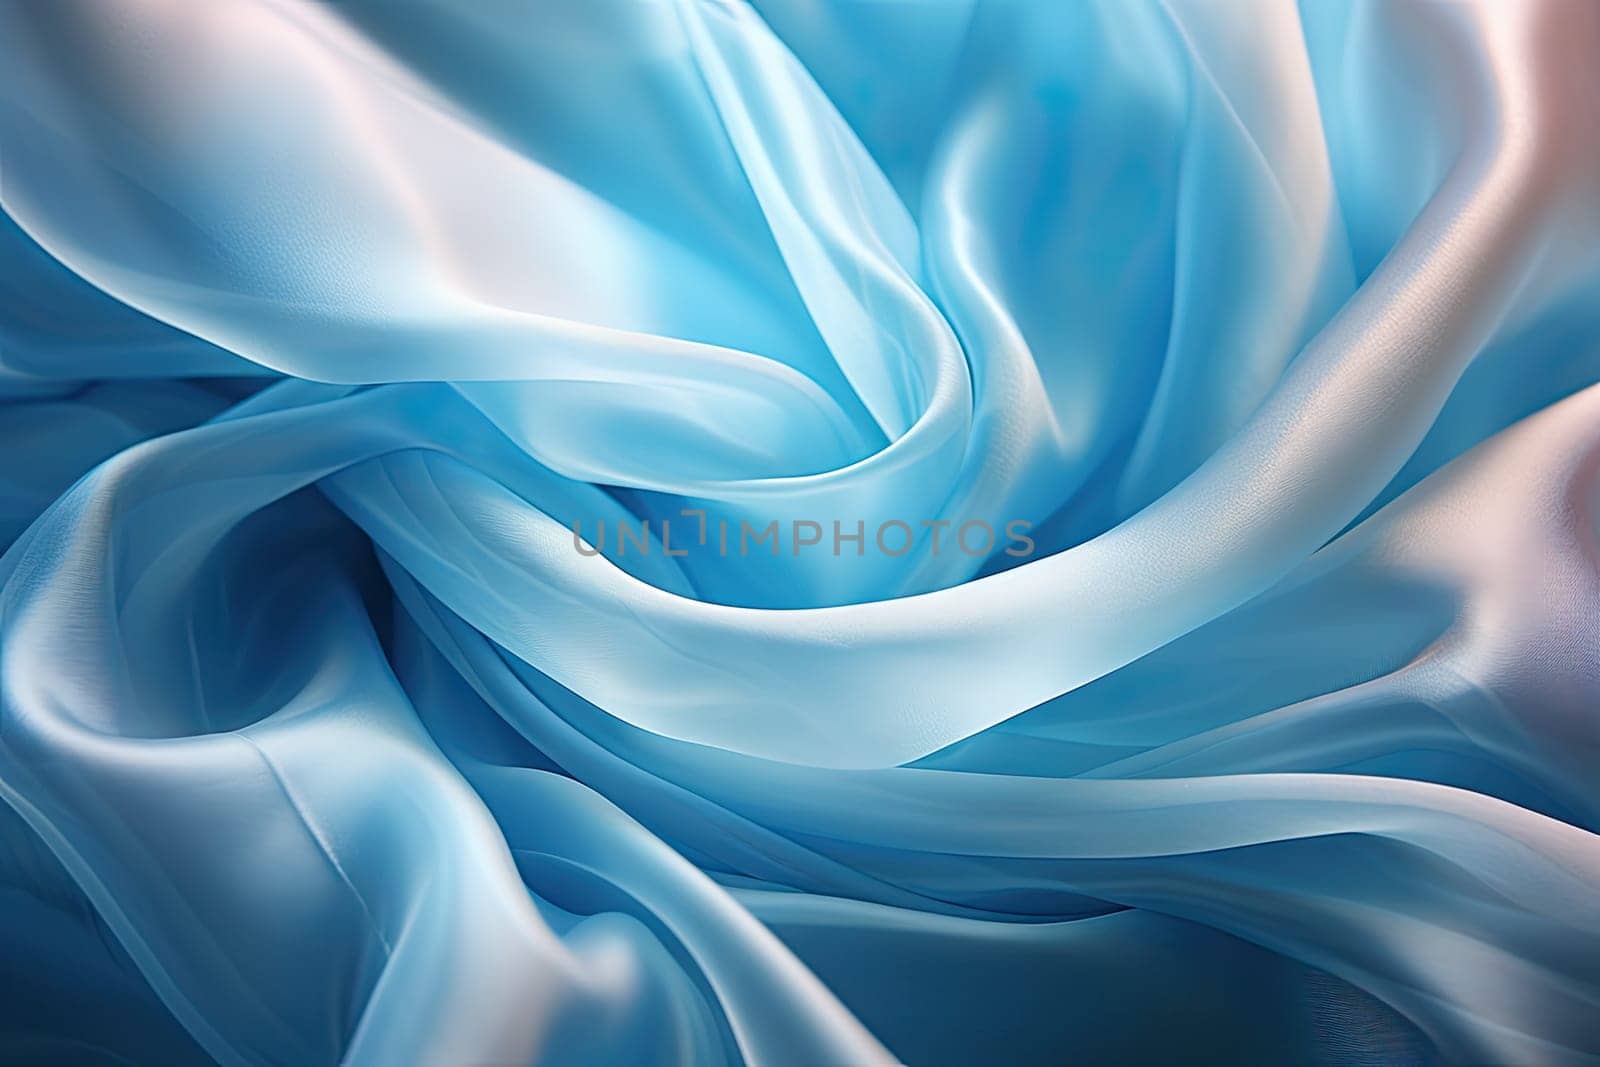 A Vibrant Close-Up of Blue and White Fabric Patterns